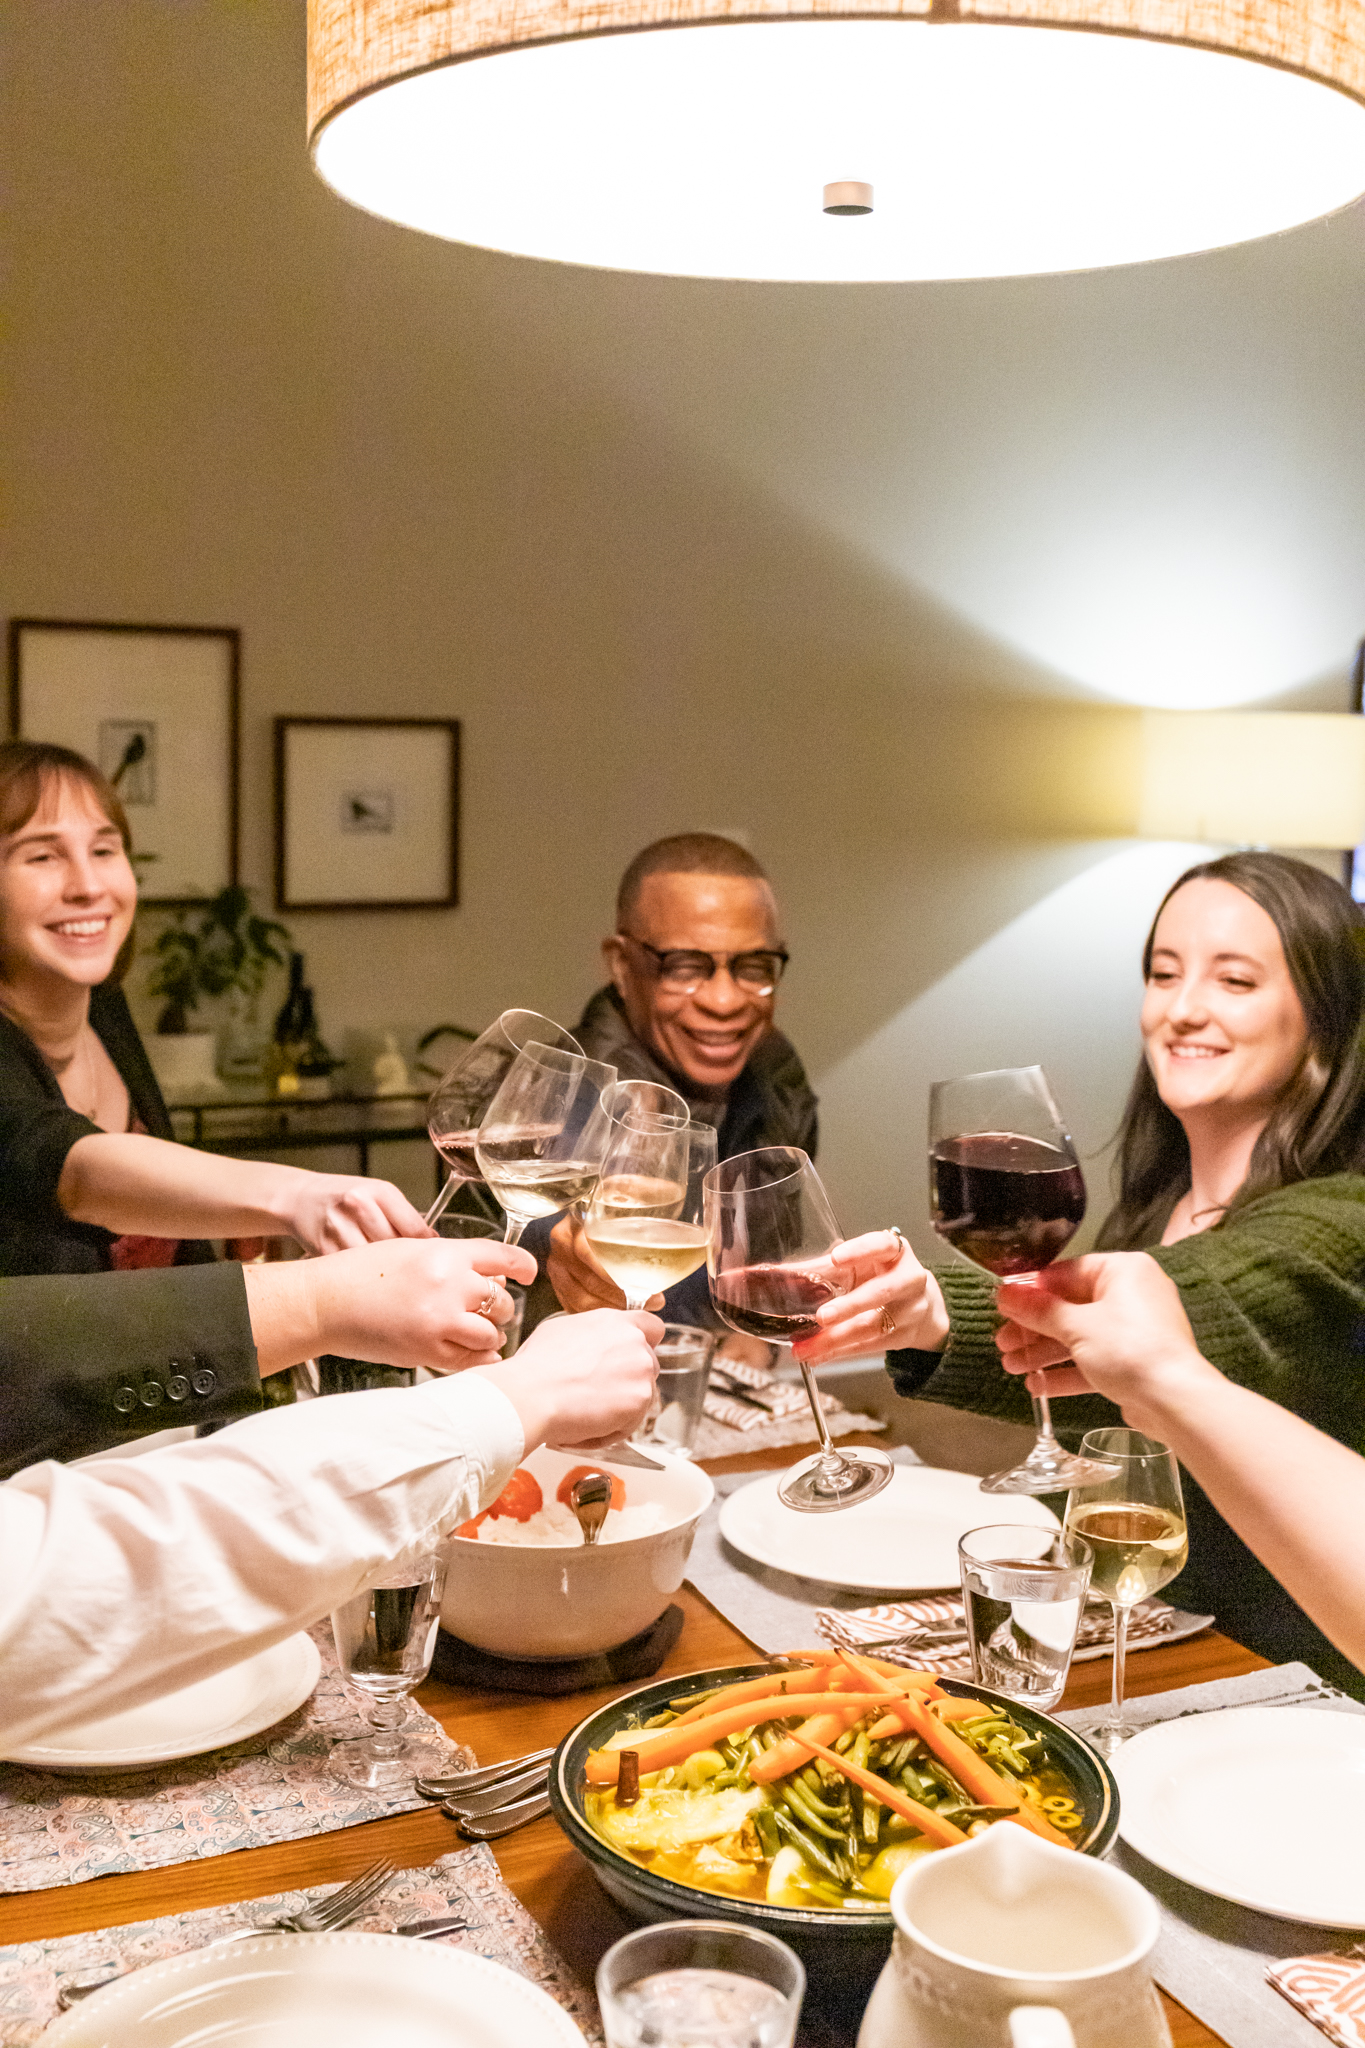 People toasting with glasses of wine over a dinner table